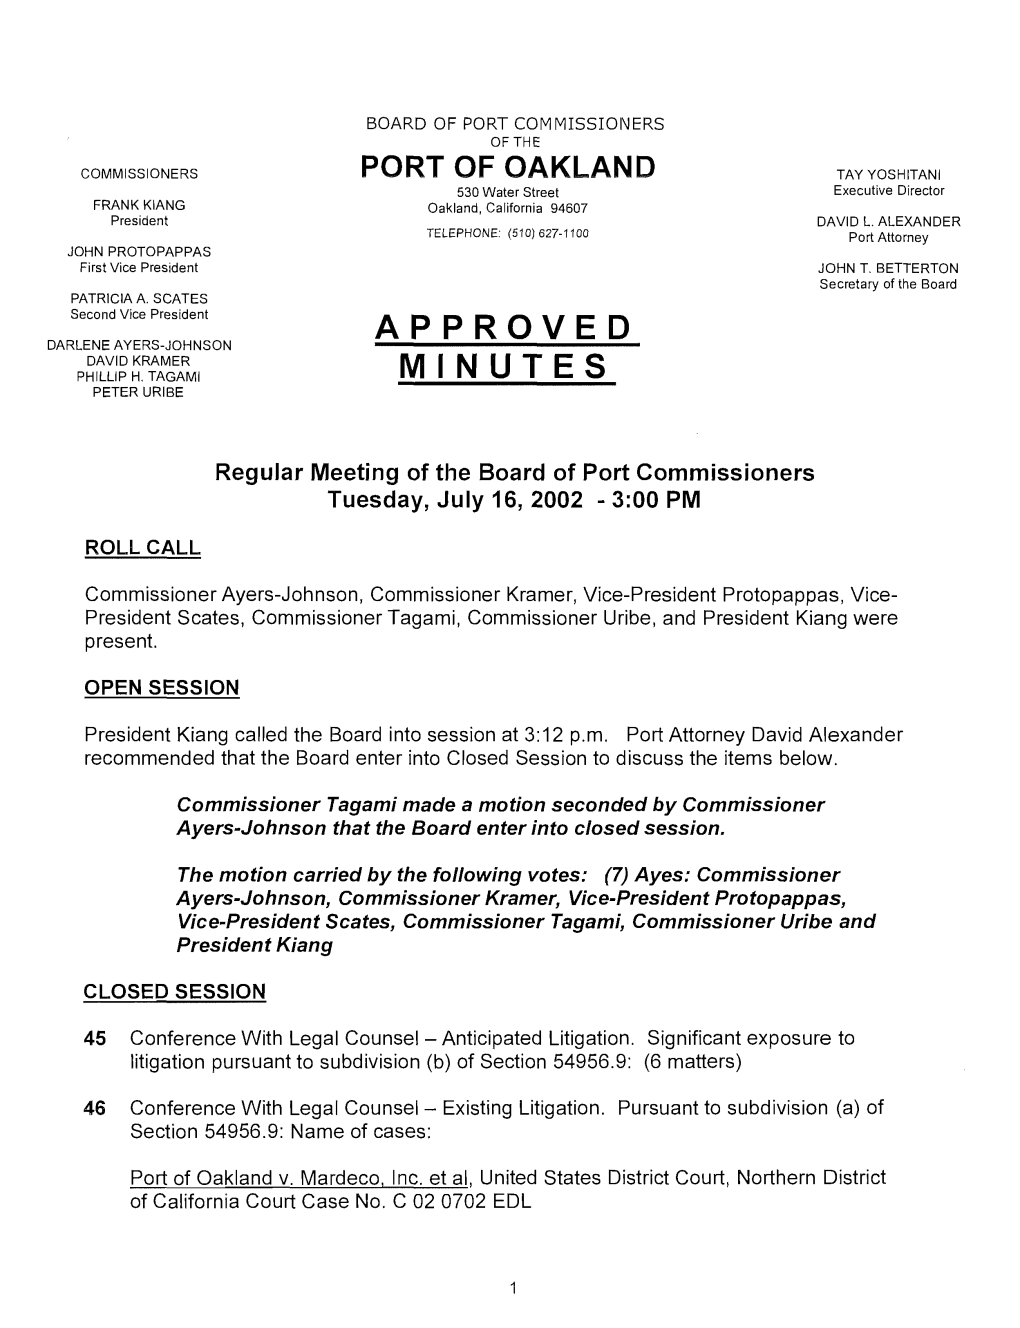 Continued Meeting of the Board of Port Commissioners Monday, September 23, 2002 — 1:30 PM